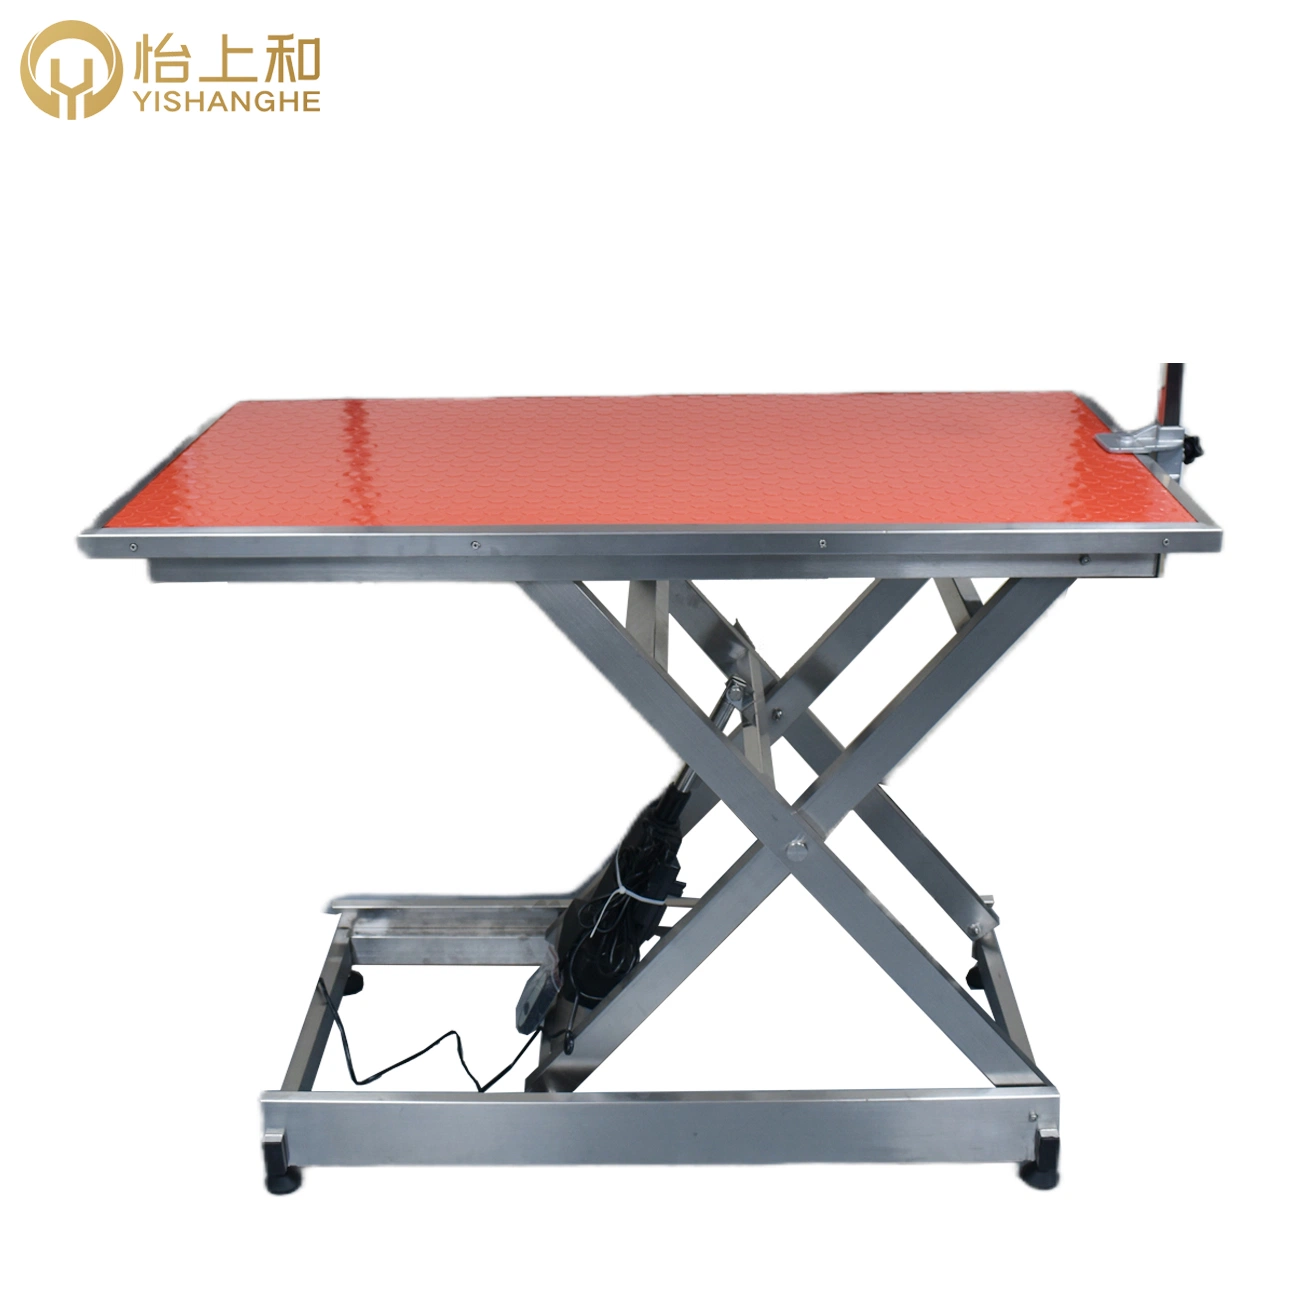 Adjustable Electric Operating Room Dog Show Table Pet Grooming Table